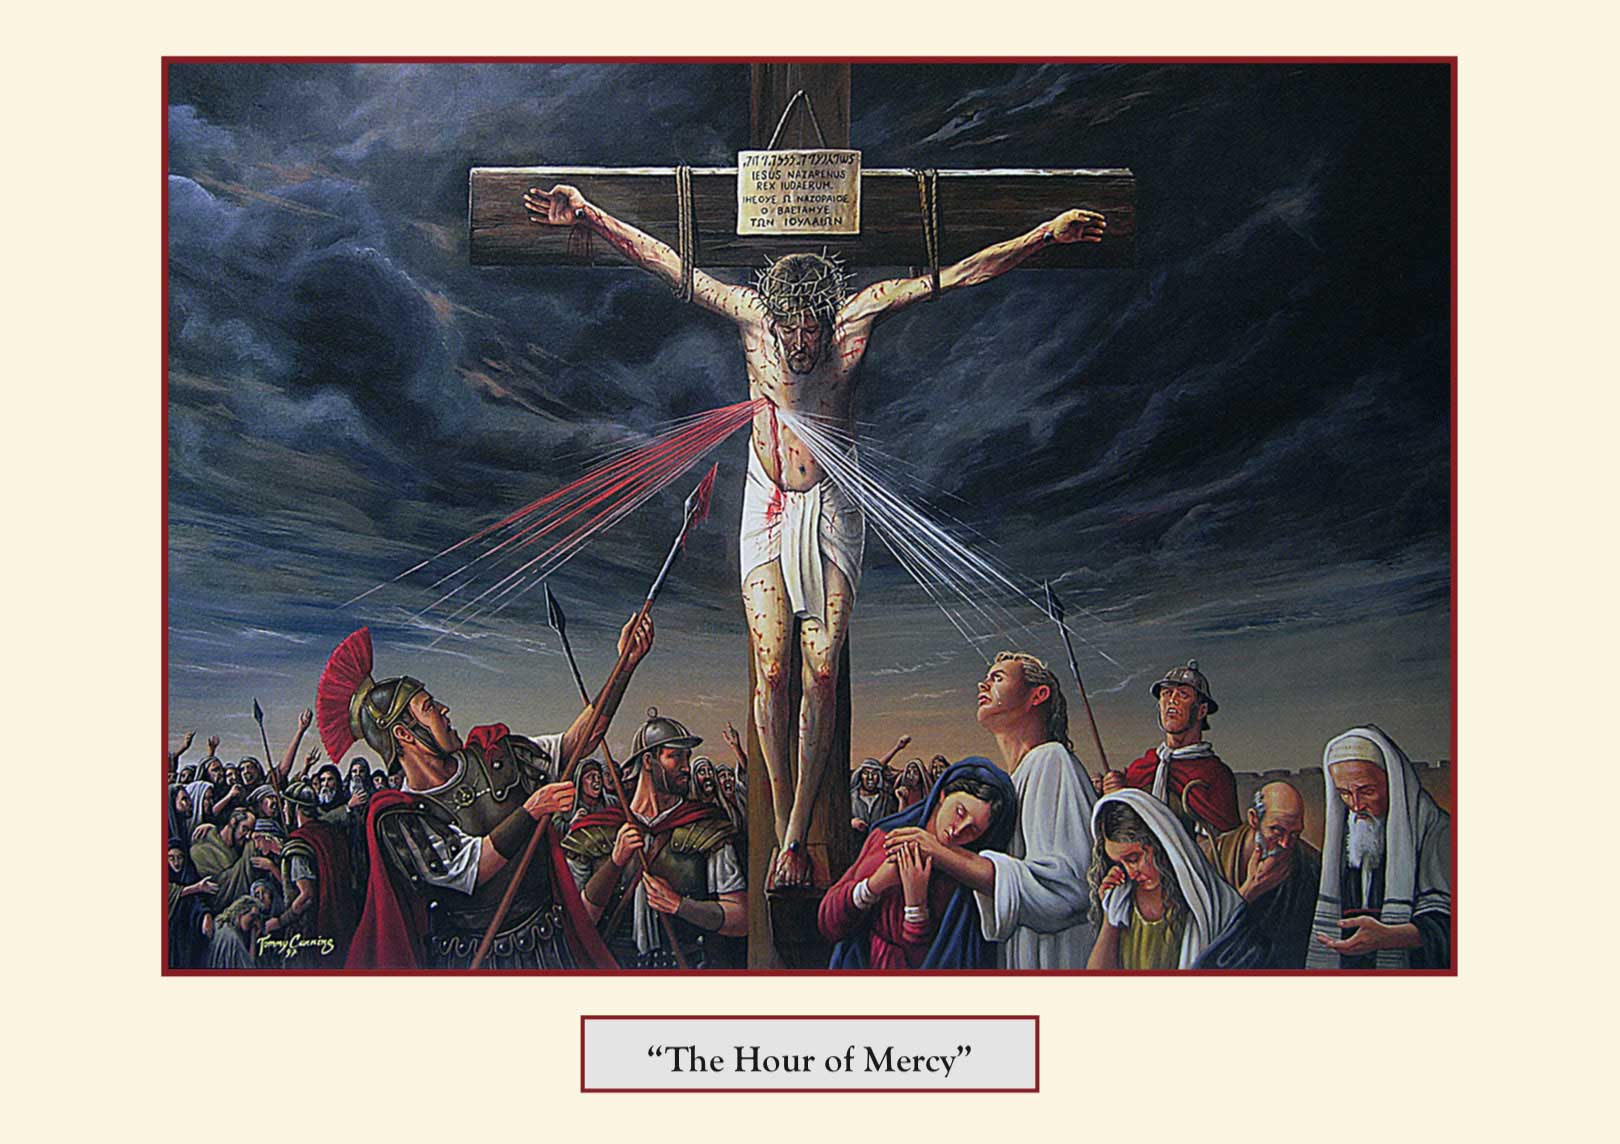 The Hour of Mercy